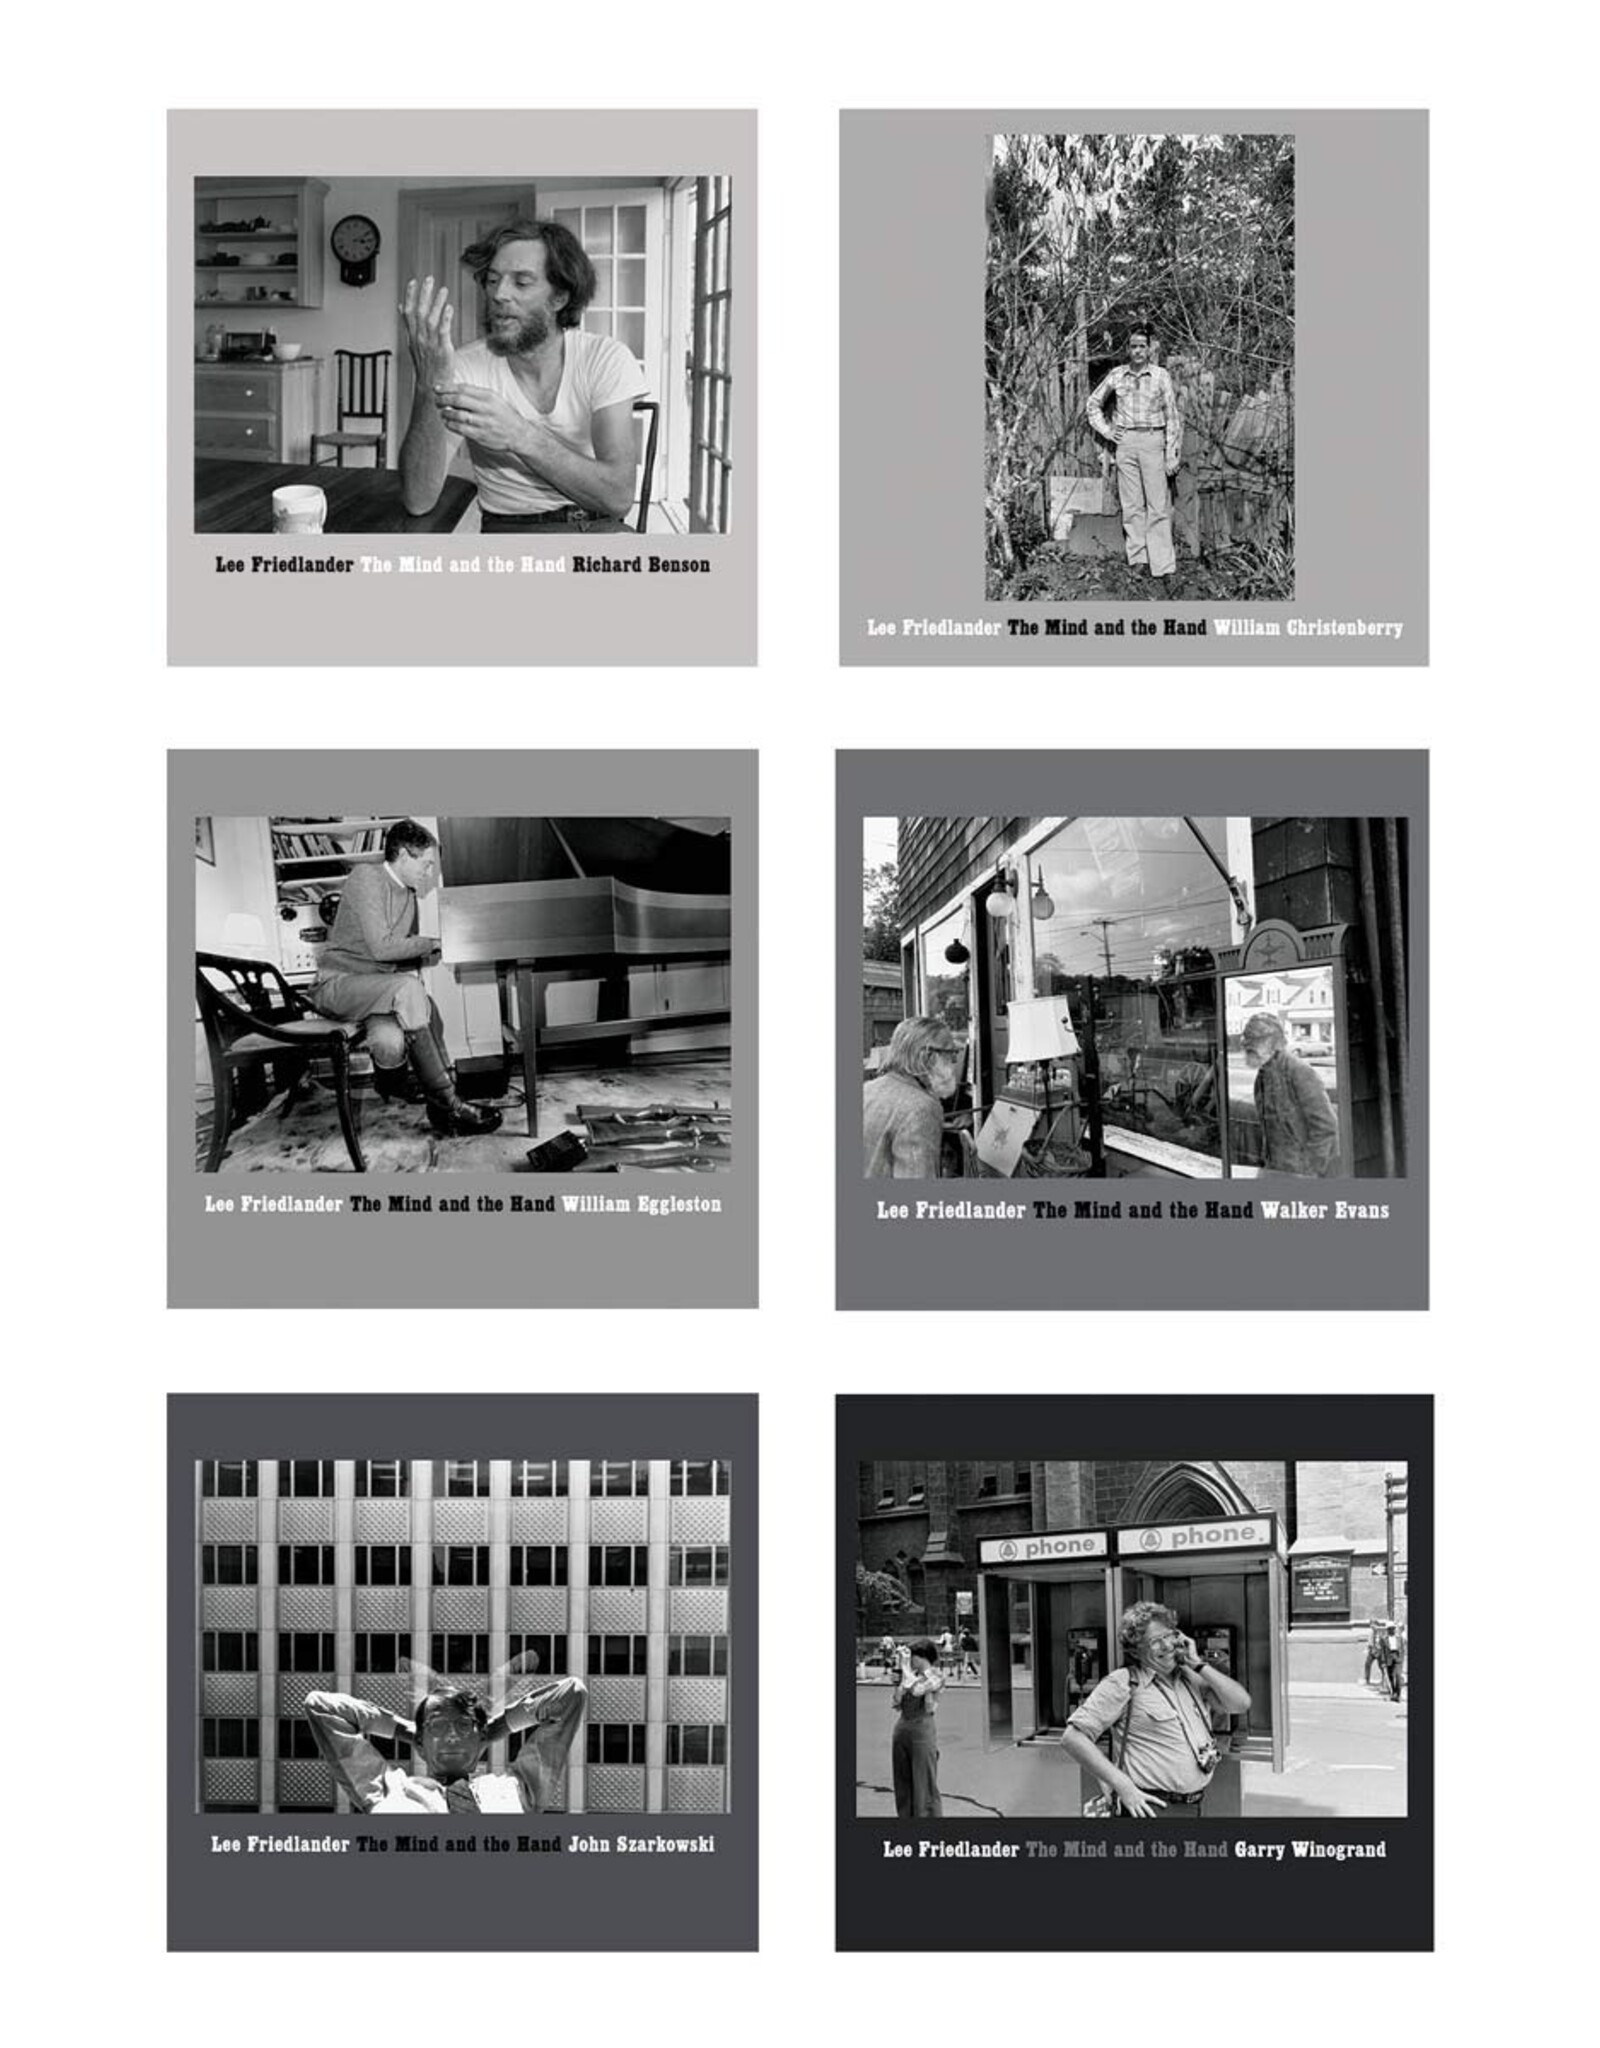 Lee Friedlander: The Mind and the Hand